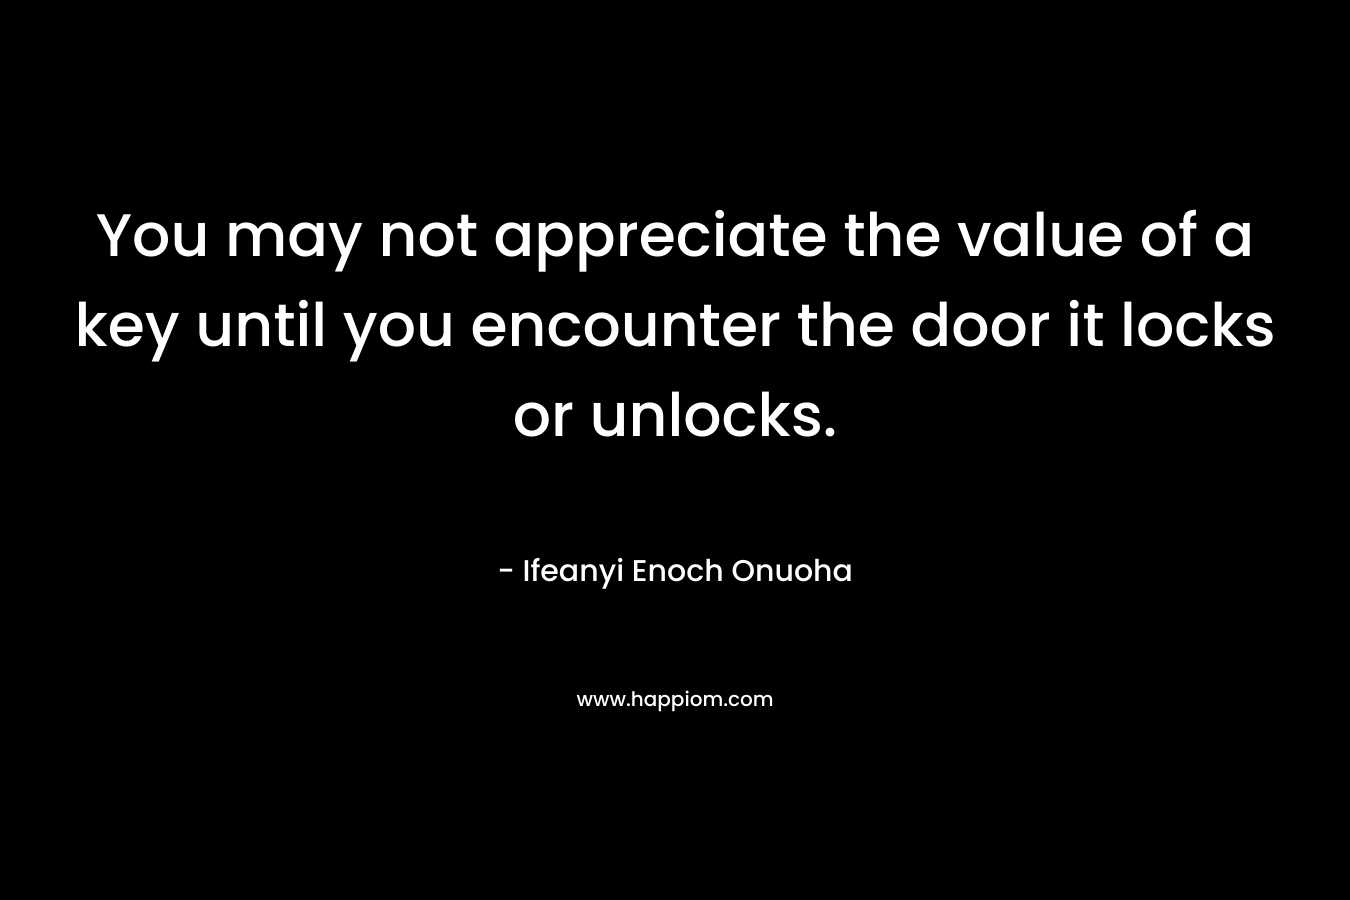 You may not appreciate the value of a key until you encounter the door it locks or unlocks.